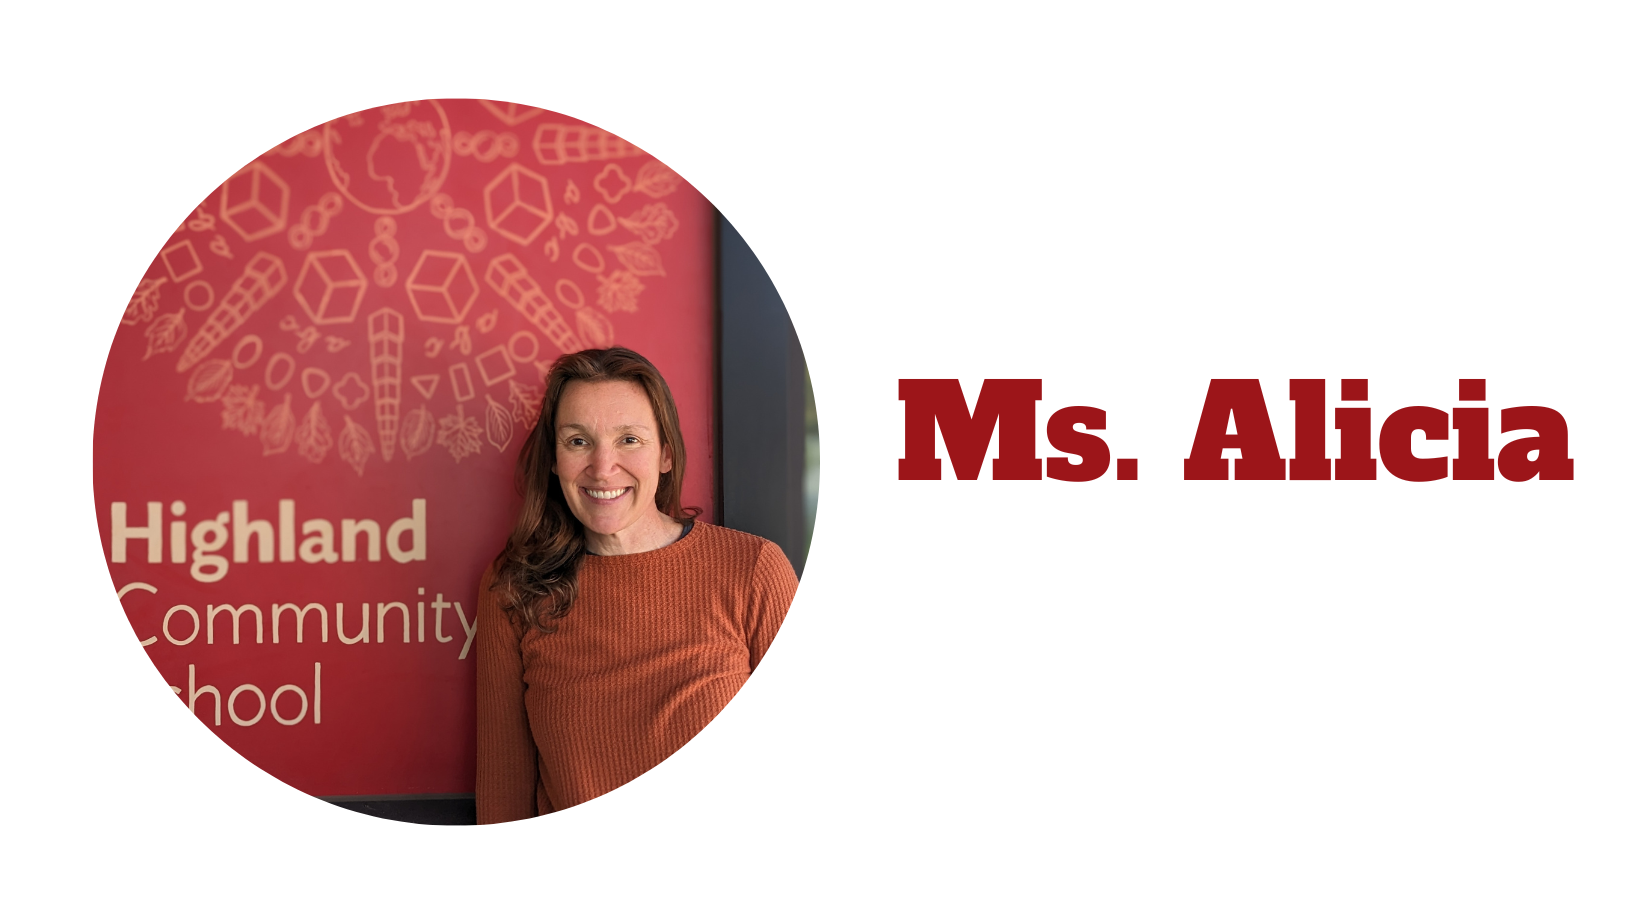 Ms. Alicia’s 10-Year Journey at Highland Community School